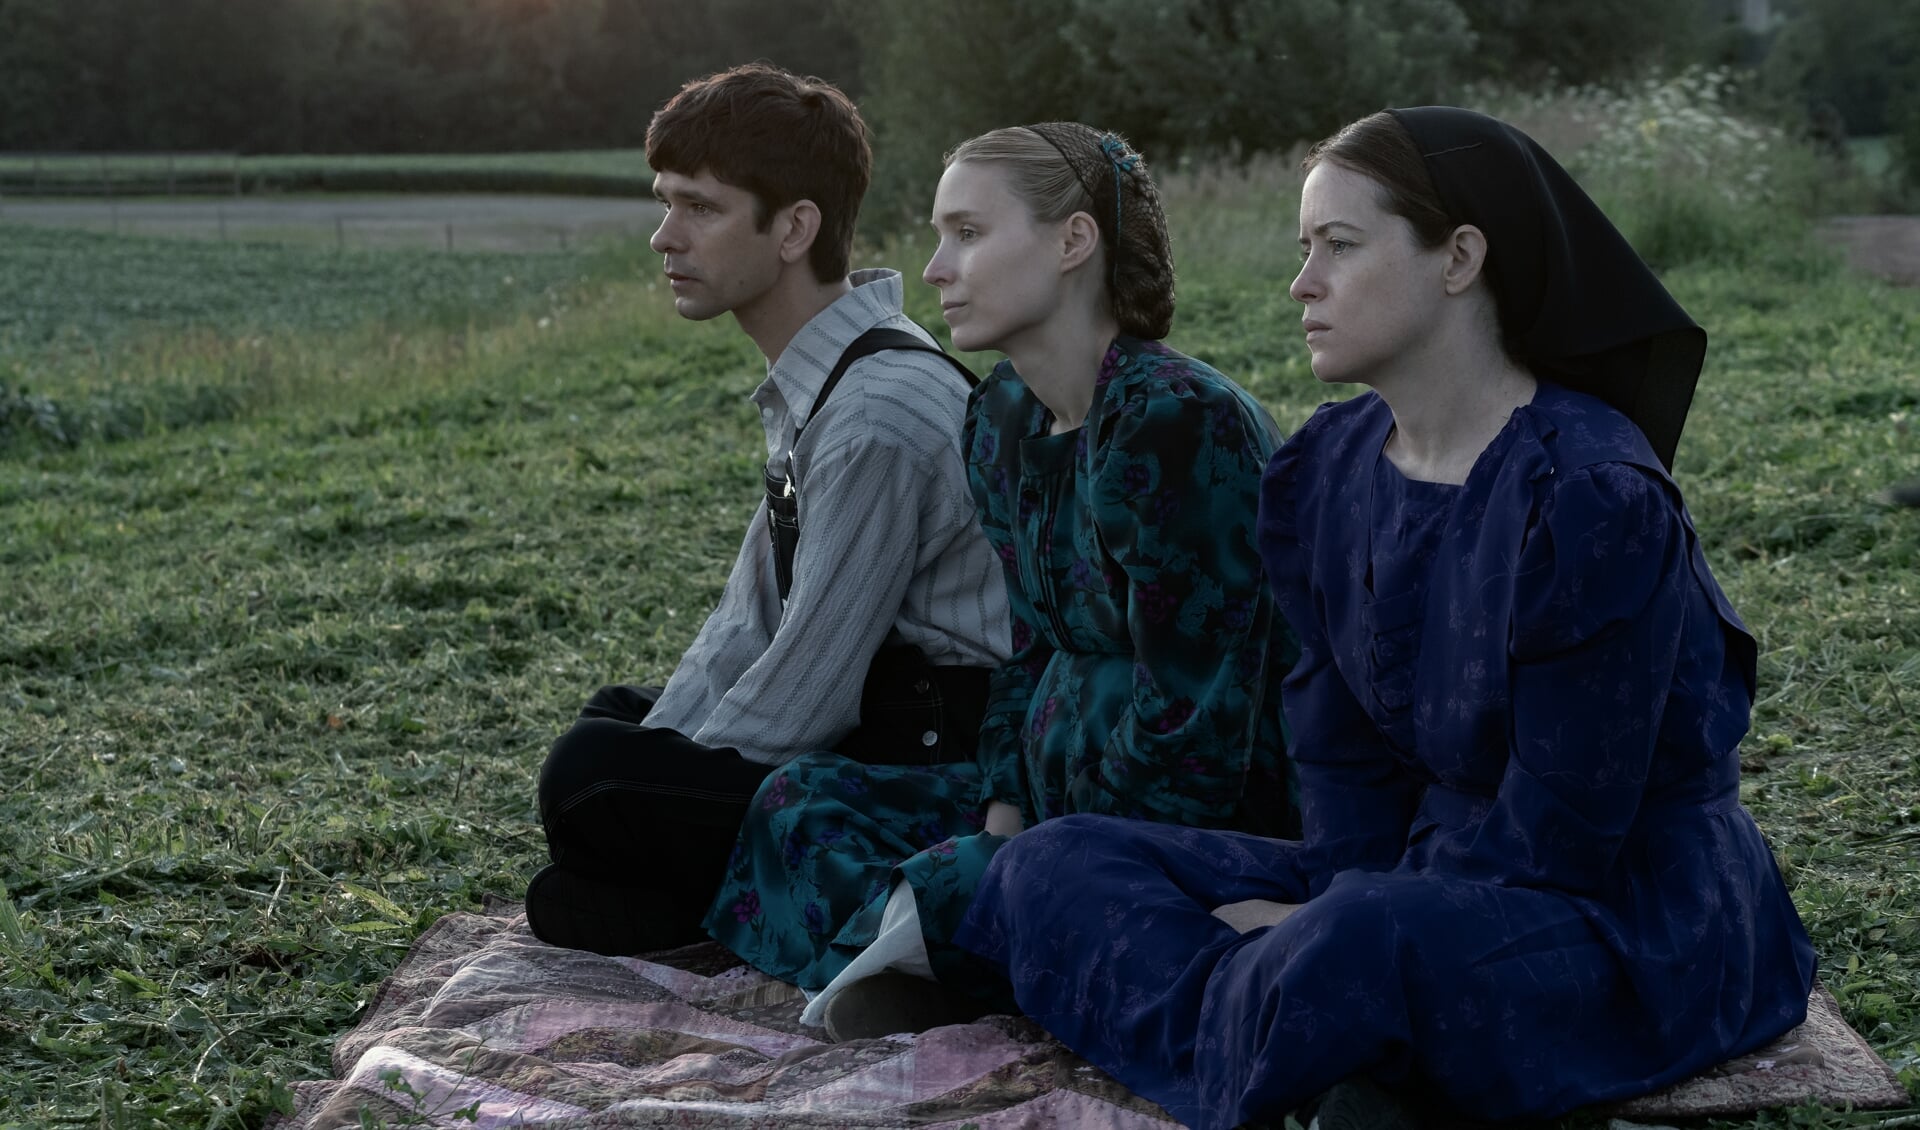 Ben Whishaw stars as August, Rooney Mara as Ona and Claire Foy as Salome
in director Sarah Polley’s film
WOMEN TALKING
An Orion Pictures Release 